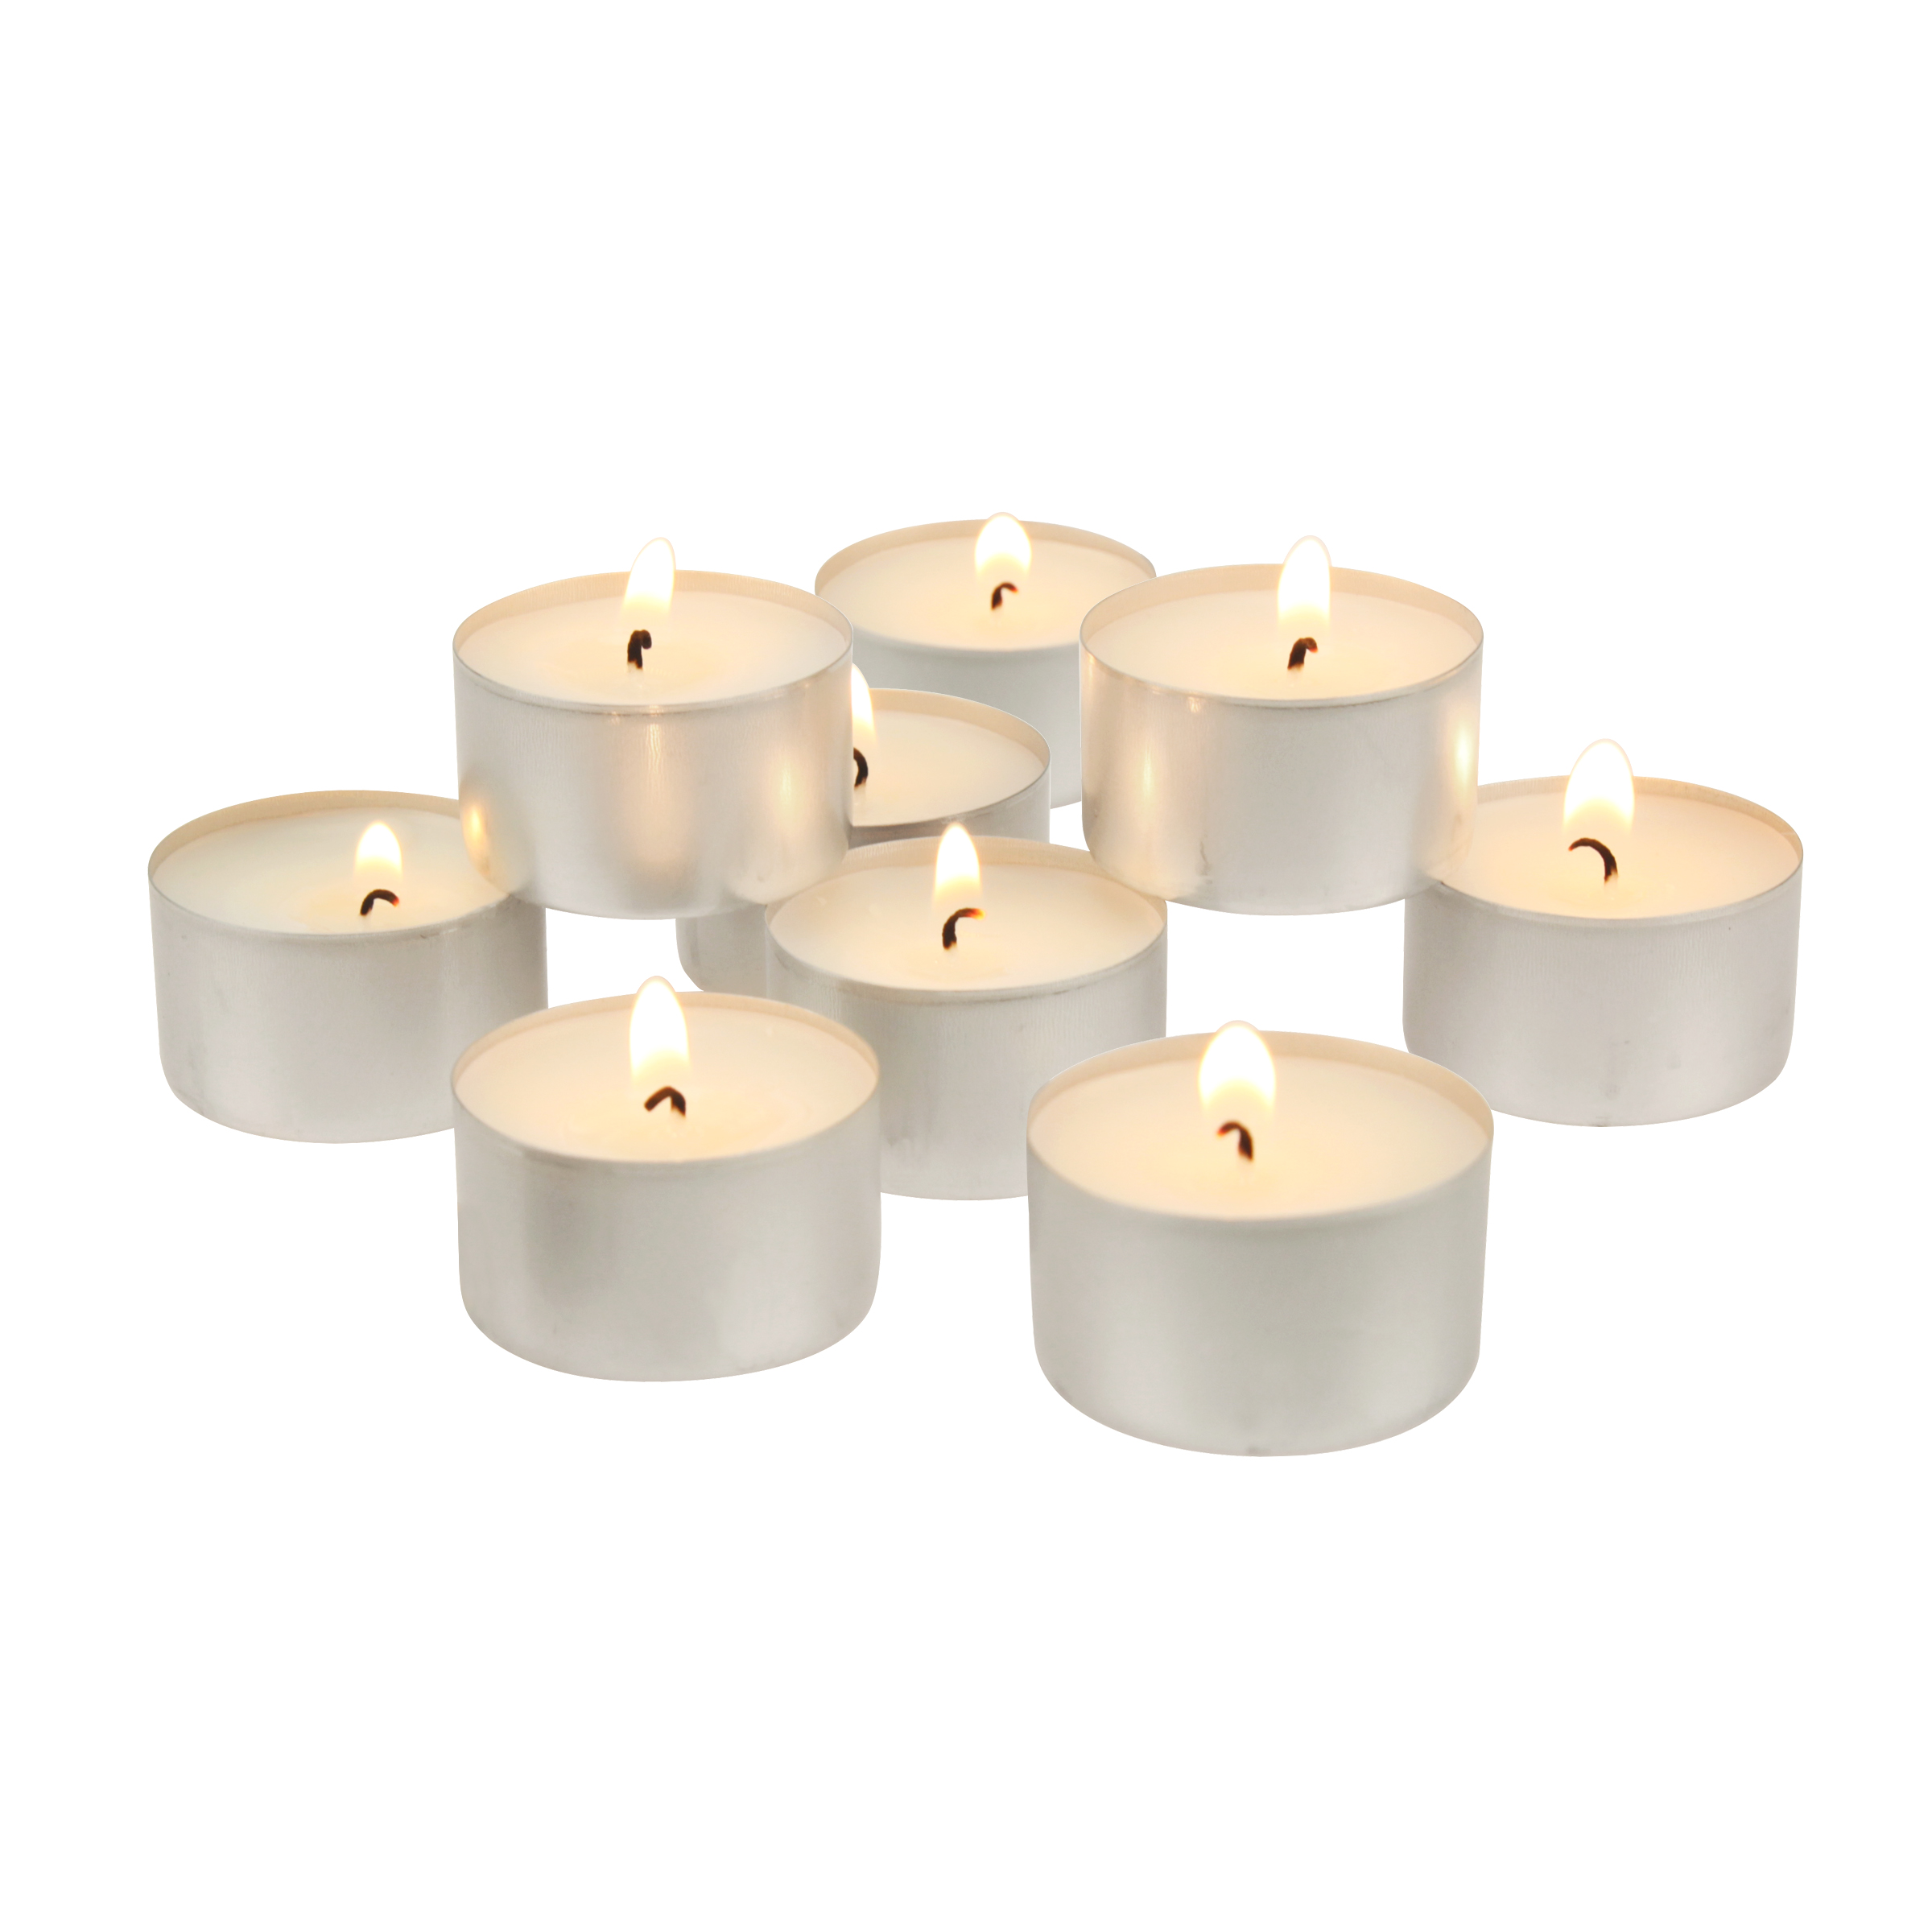 Stonebriar Unscented Long Burning Tealight Candles with 6-7 Hour Burn Time, 200 Pack, White - image 1 of 8